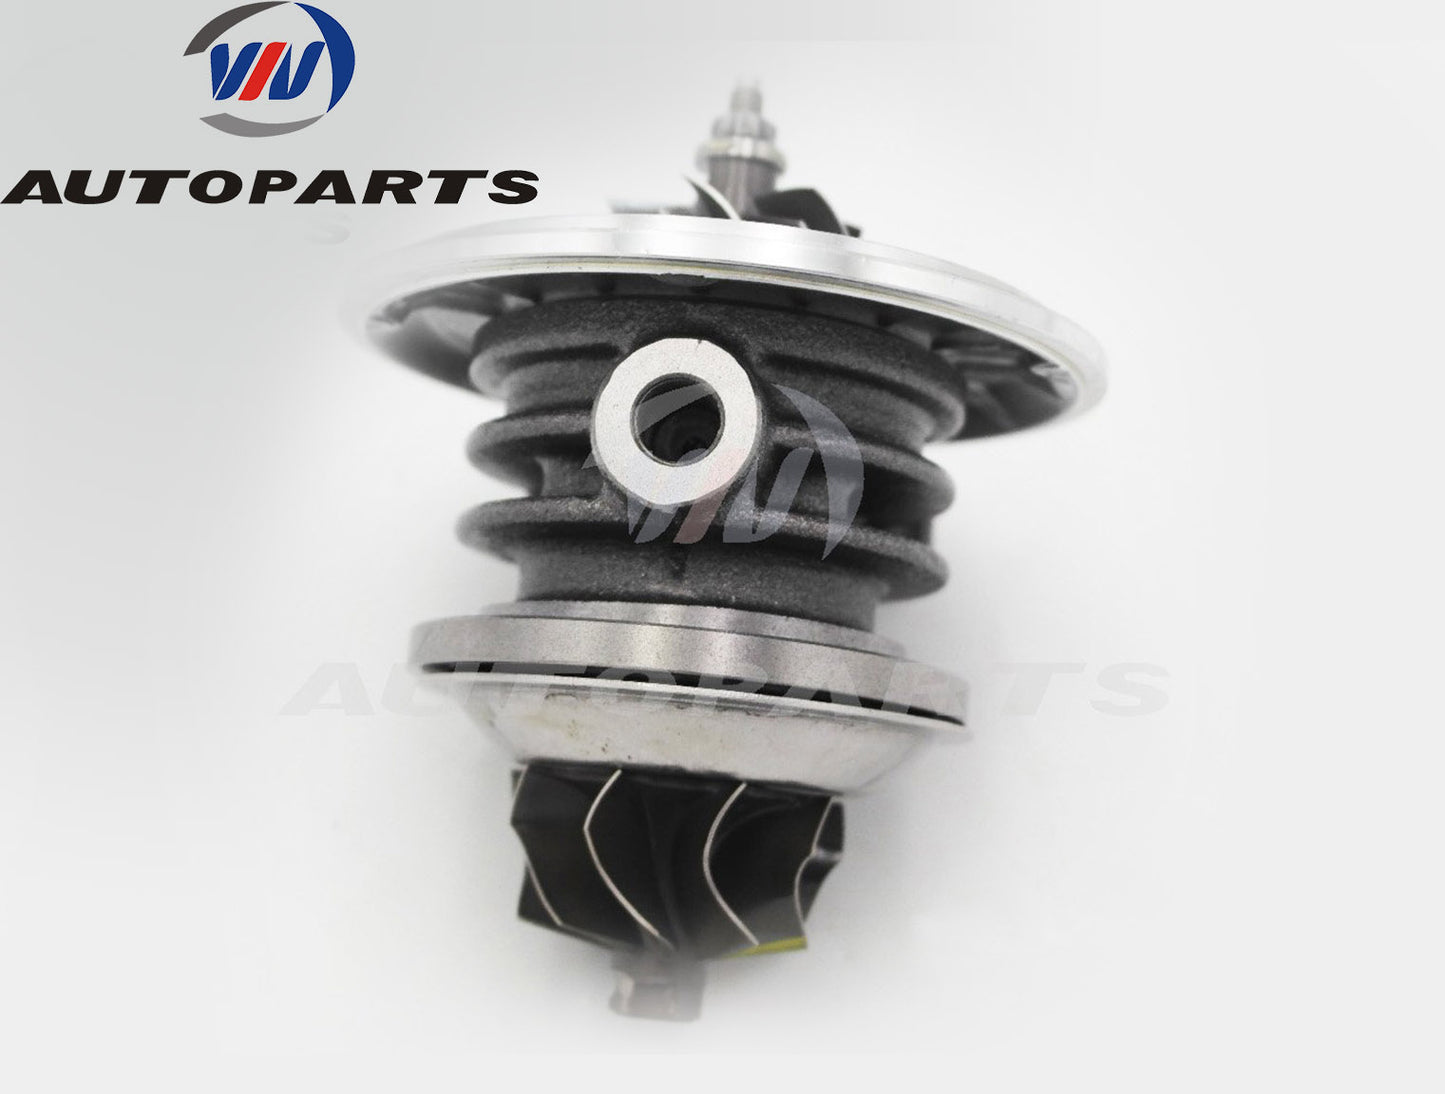 CHRA 435796-0020 for Turbocharger 454064-0001 for VW Commercial T4 Bus with Umwelt 1.9L Engine Diesel